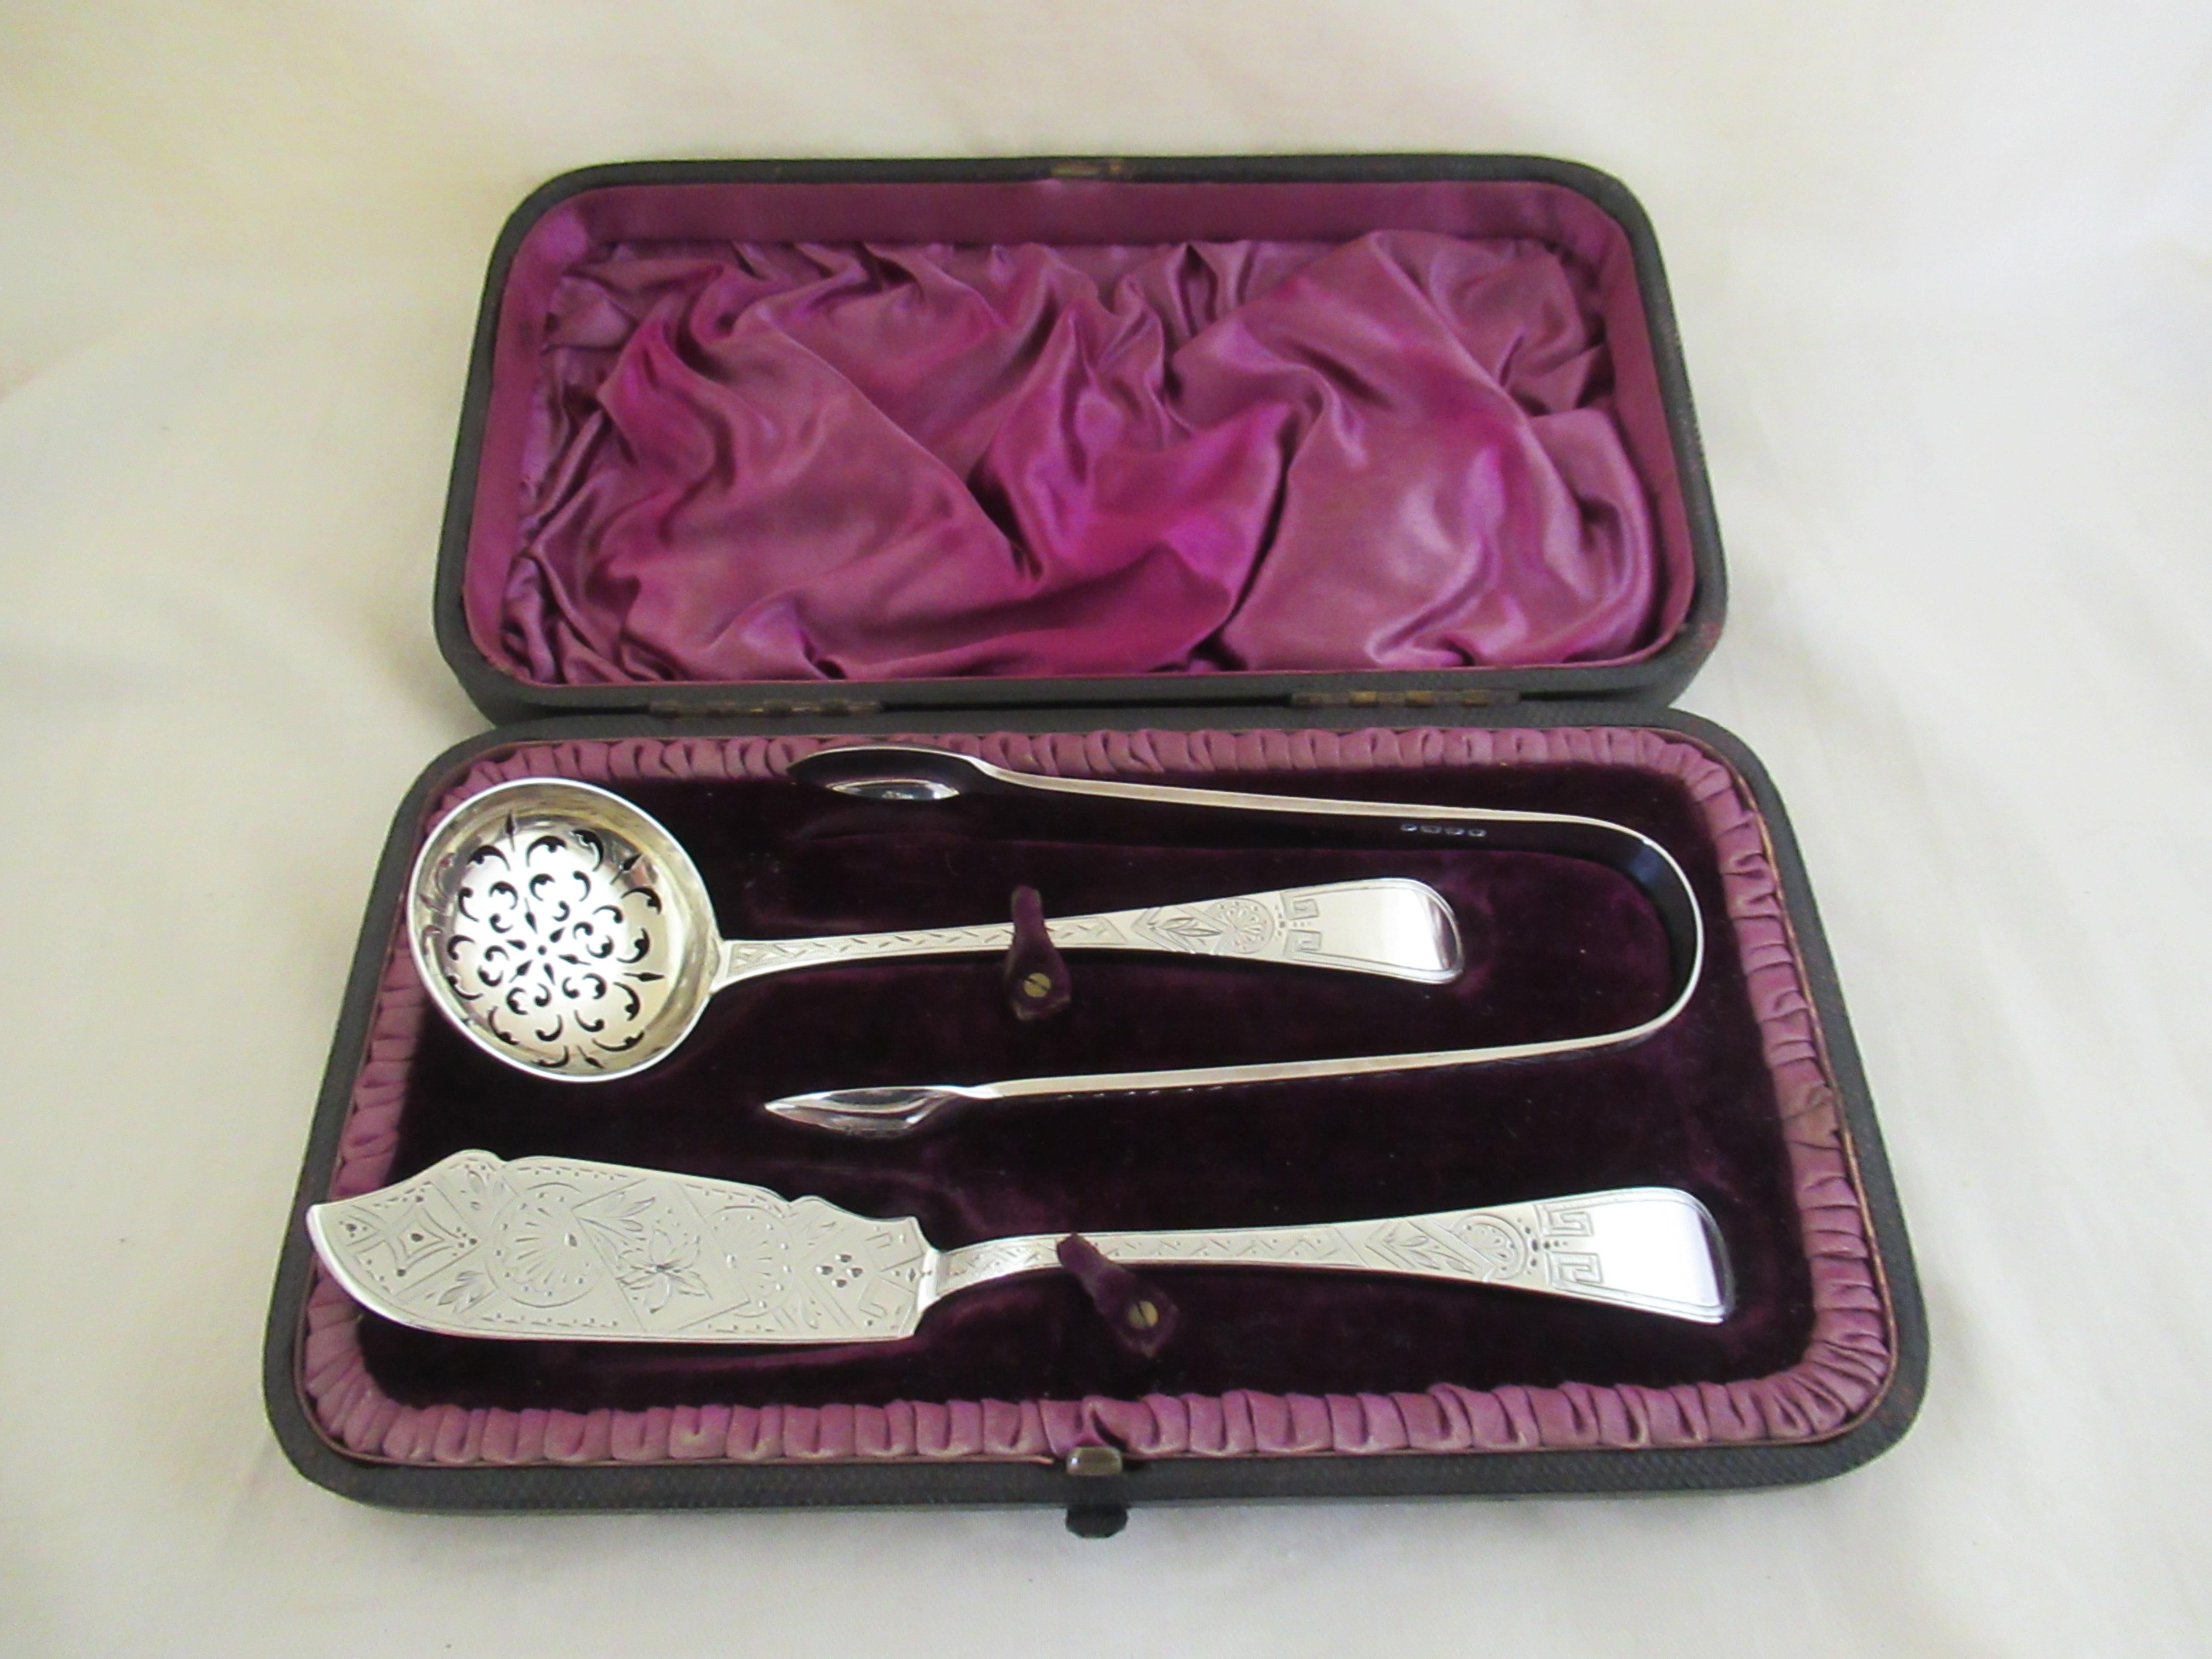 Sterling Silver - Boxed Set - Butter Knife, Sugar Tongs & Sugar Sifter Spoon.
All three pieces are identically stamped with a full English hallmark, applied by the London Assay Office:-
 Queen Victoria`s Head - Duty mark (duty has been paid to the